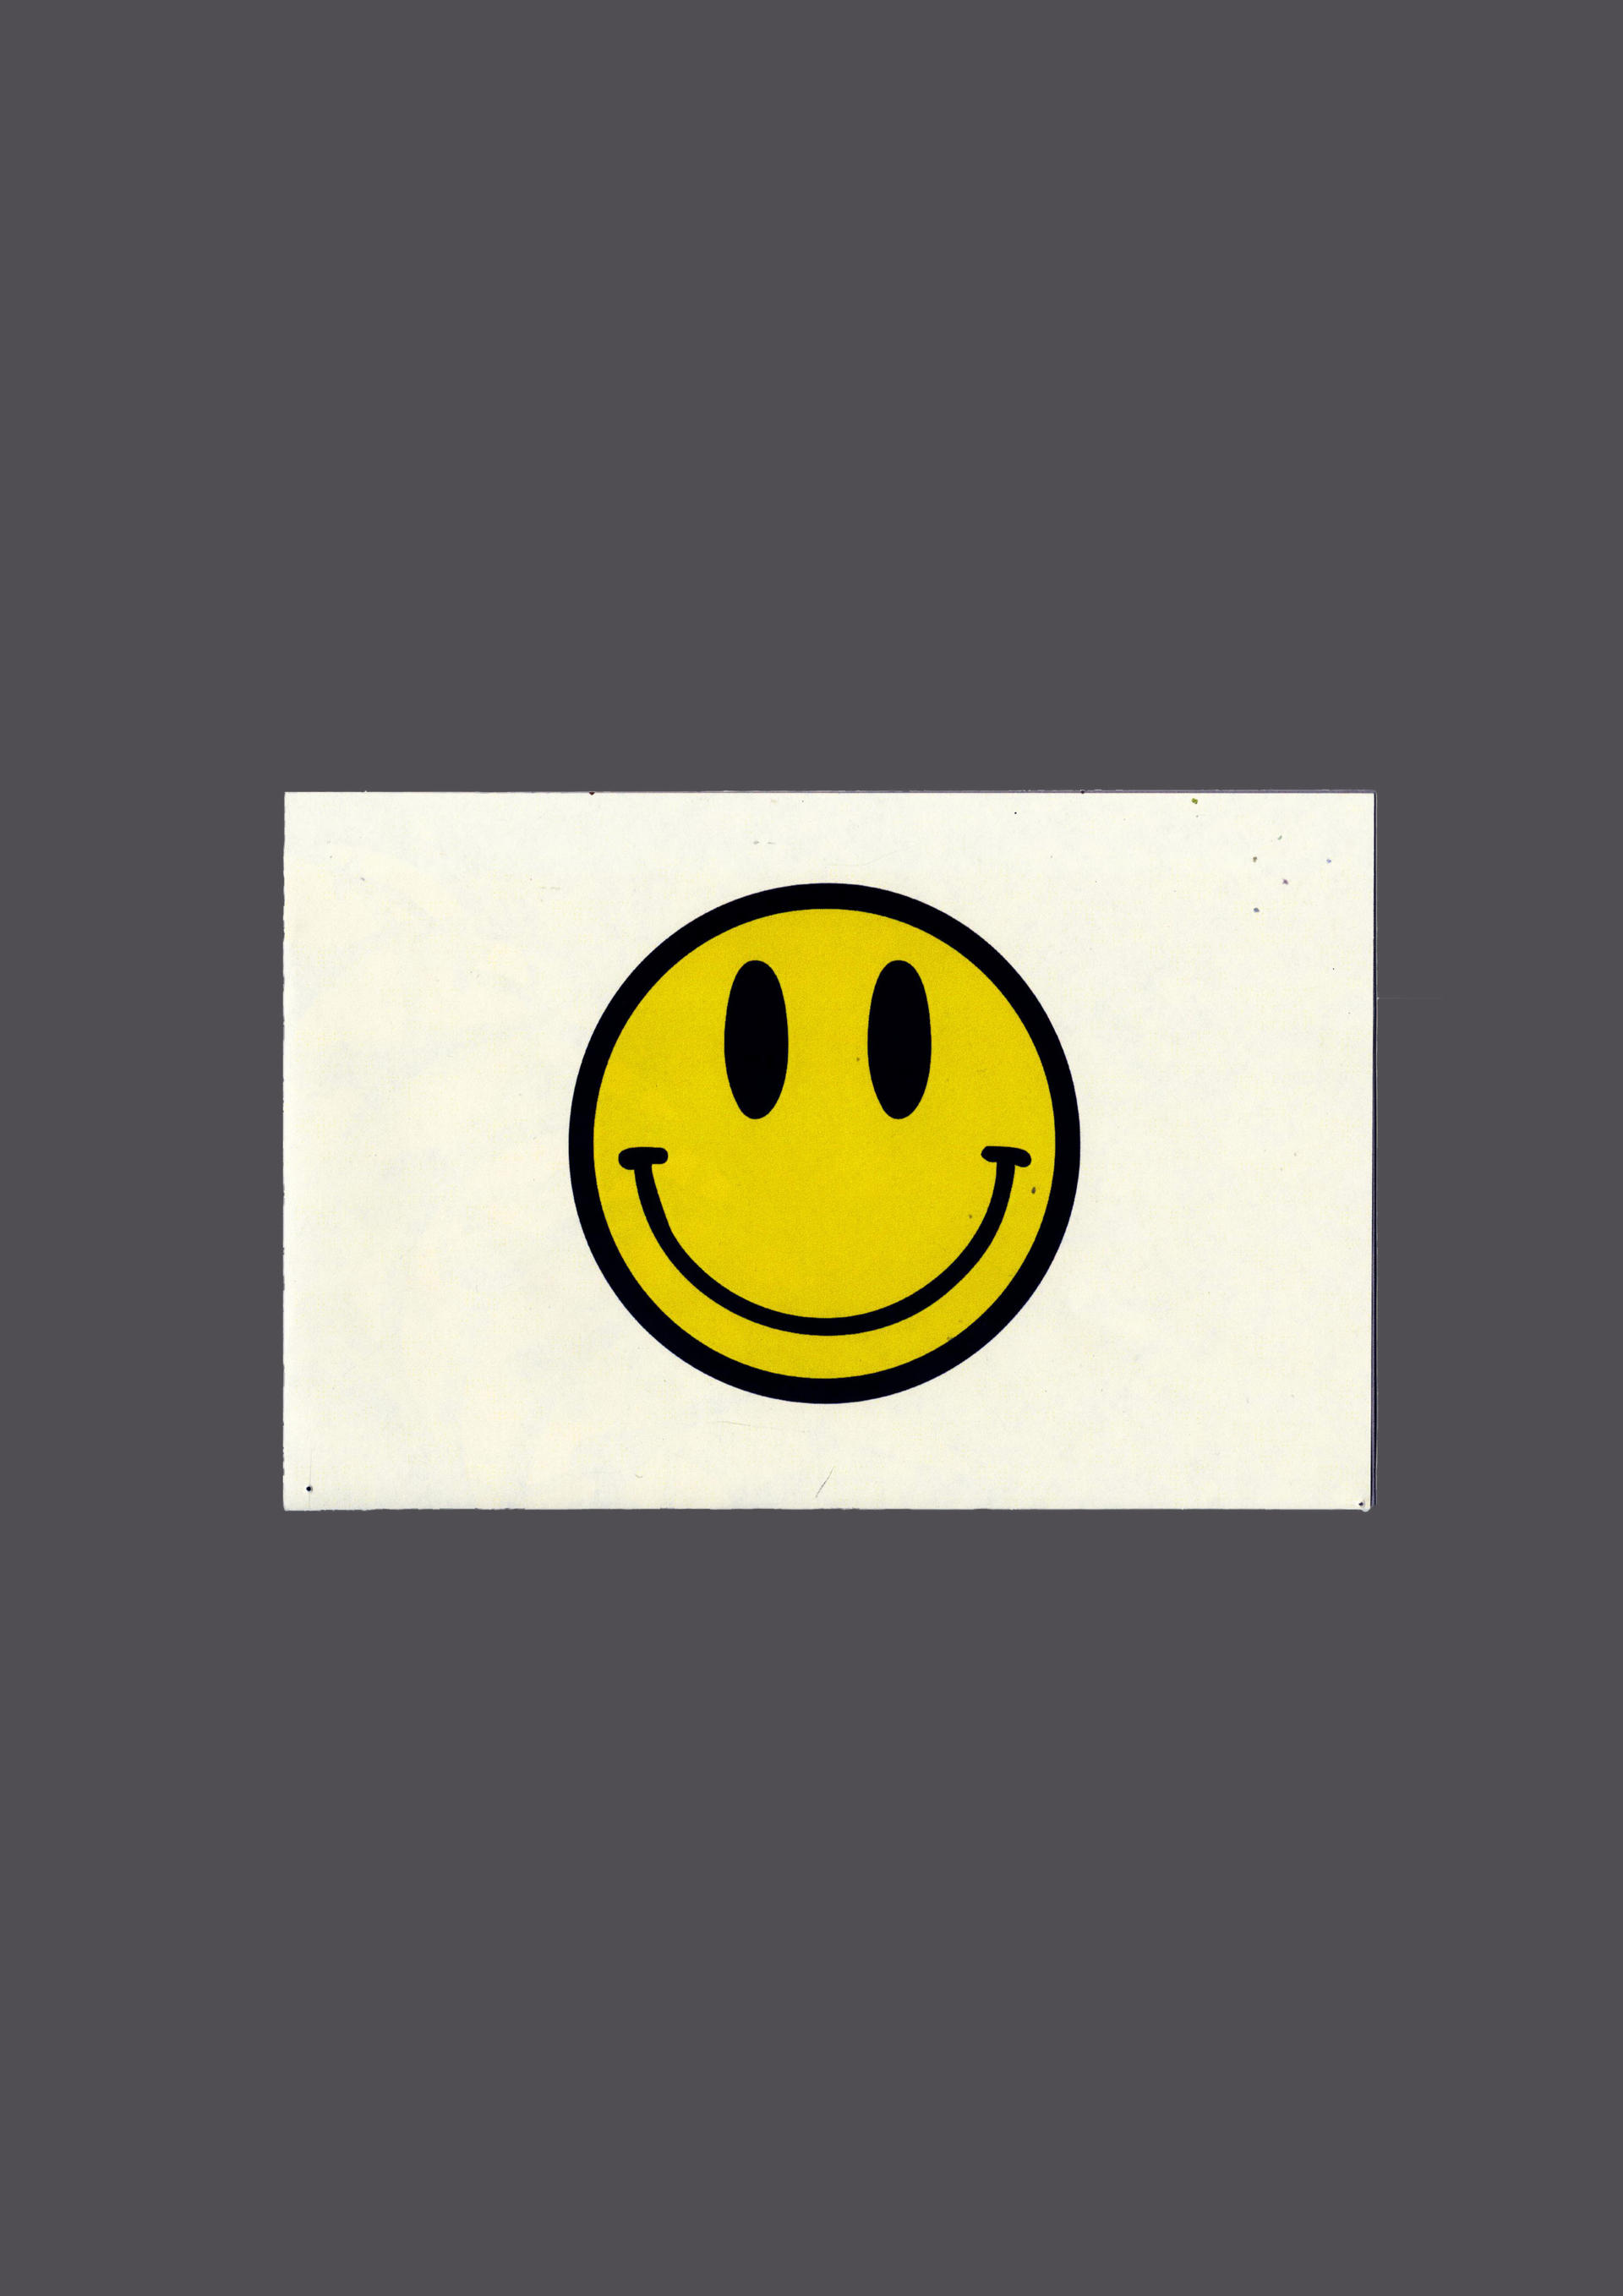 Smiley face graphic with white rectangle behind